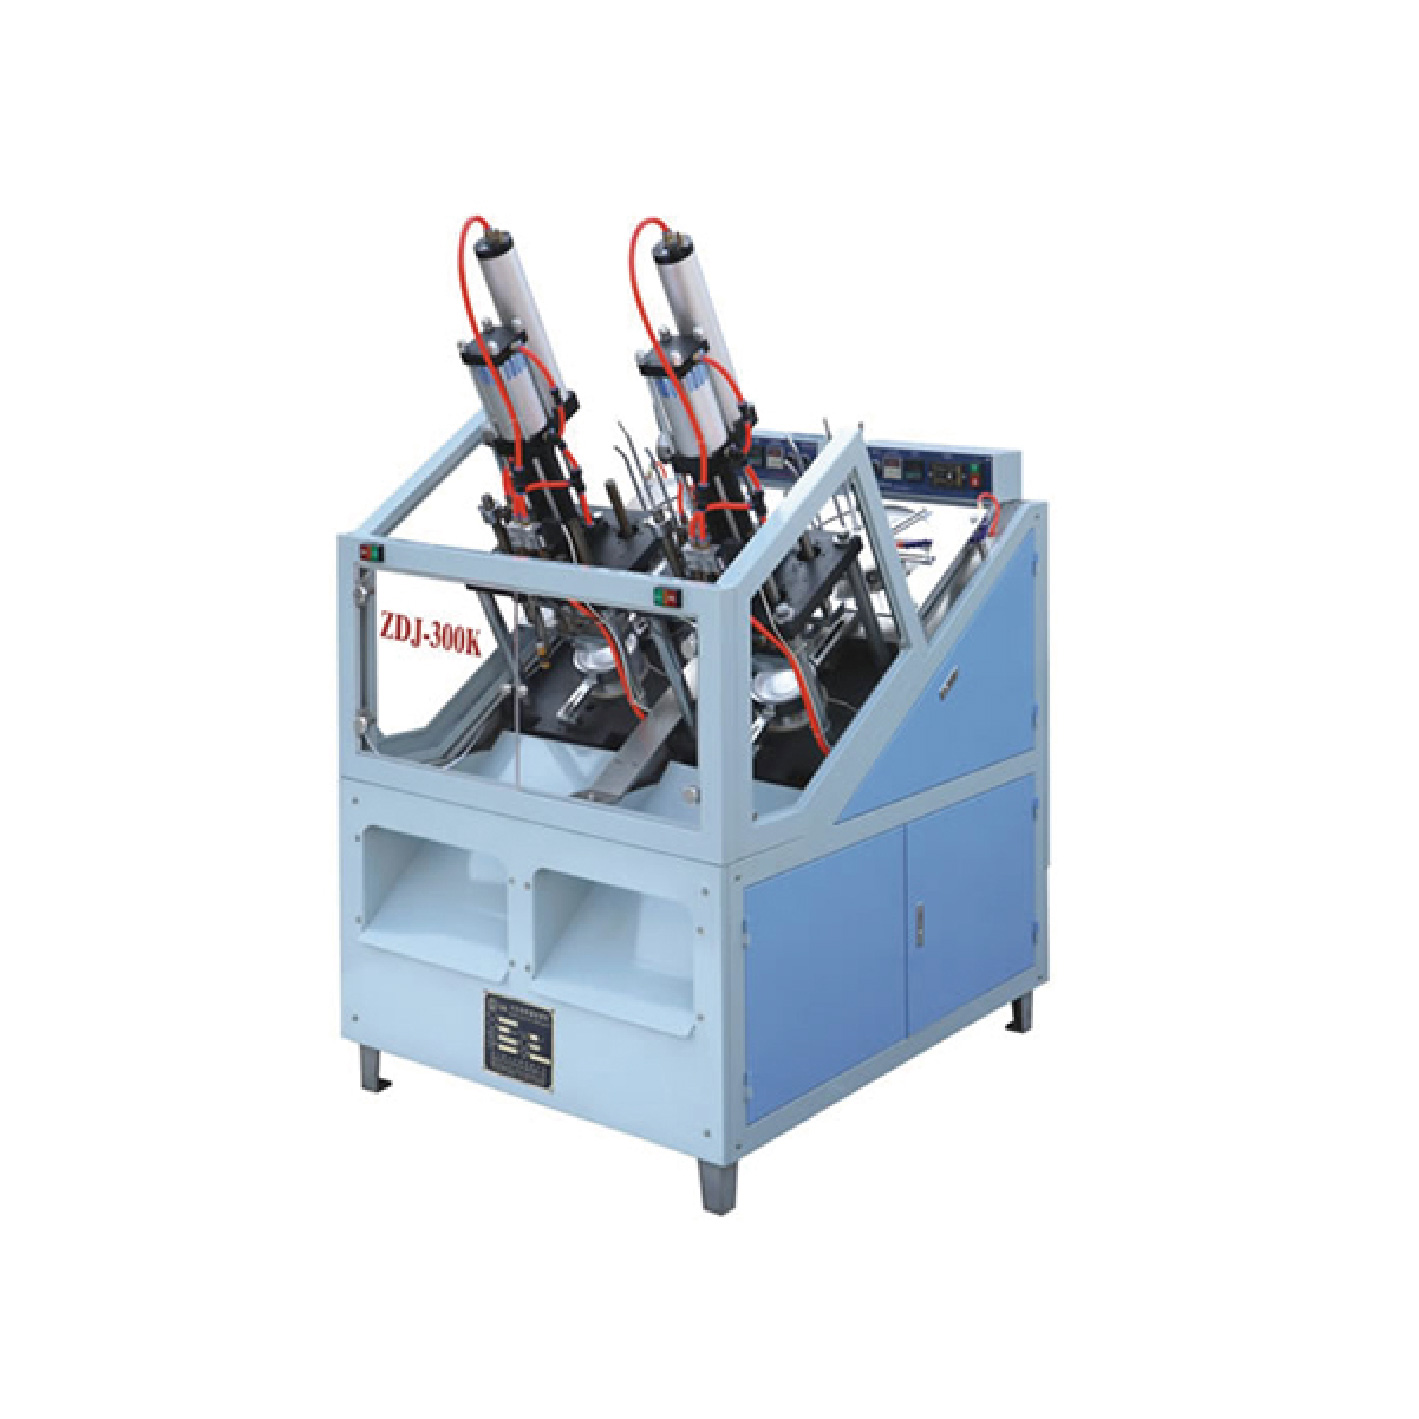 ZDJ-300K High-Speed Automatic Paper Plate Forming Machine